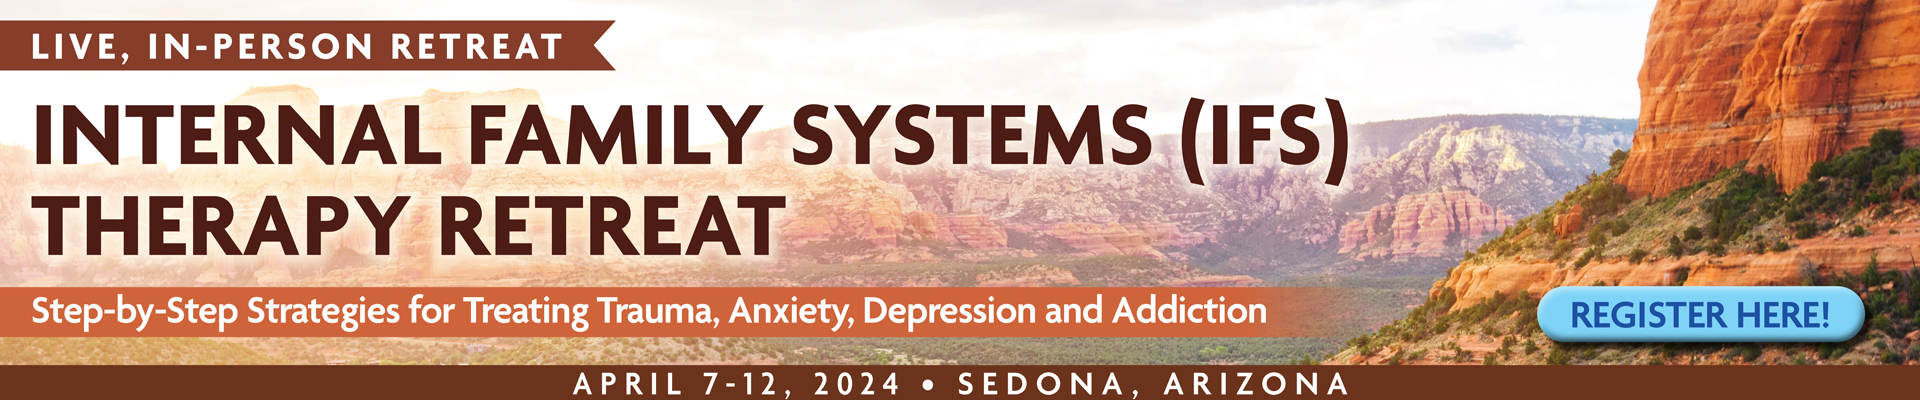 6-Day Internal Family Systems (IFS) Therapy Retreat: Step-by-Step Strategies for Treating Trauma, Anxiety, Depression and Addiction